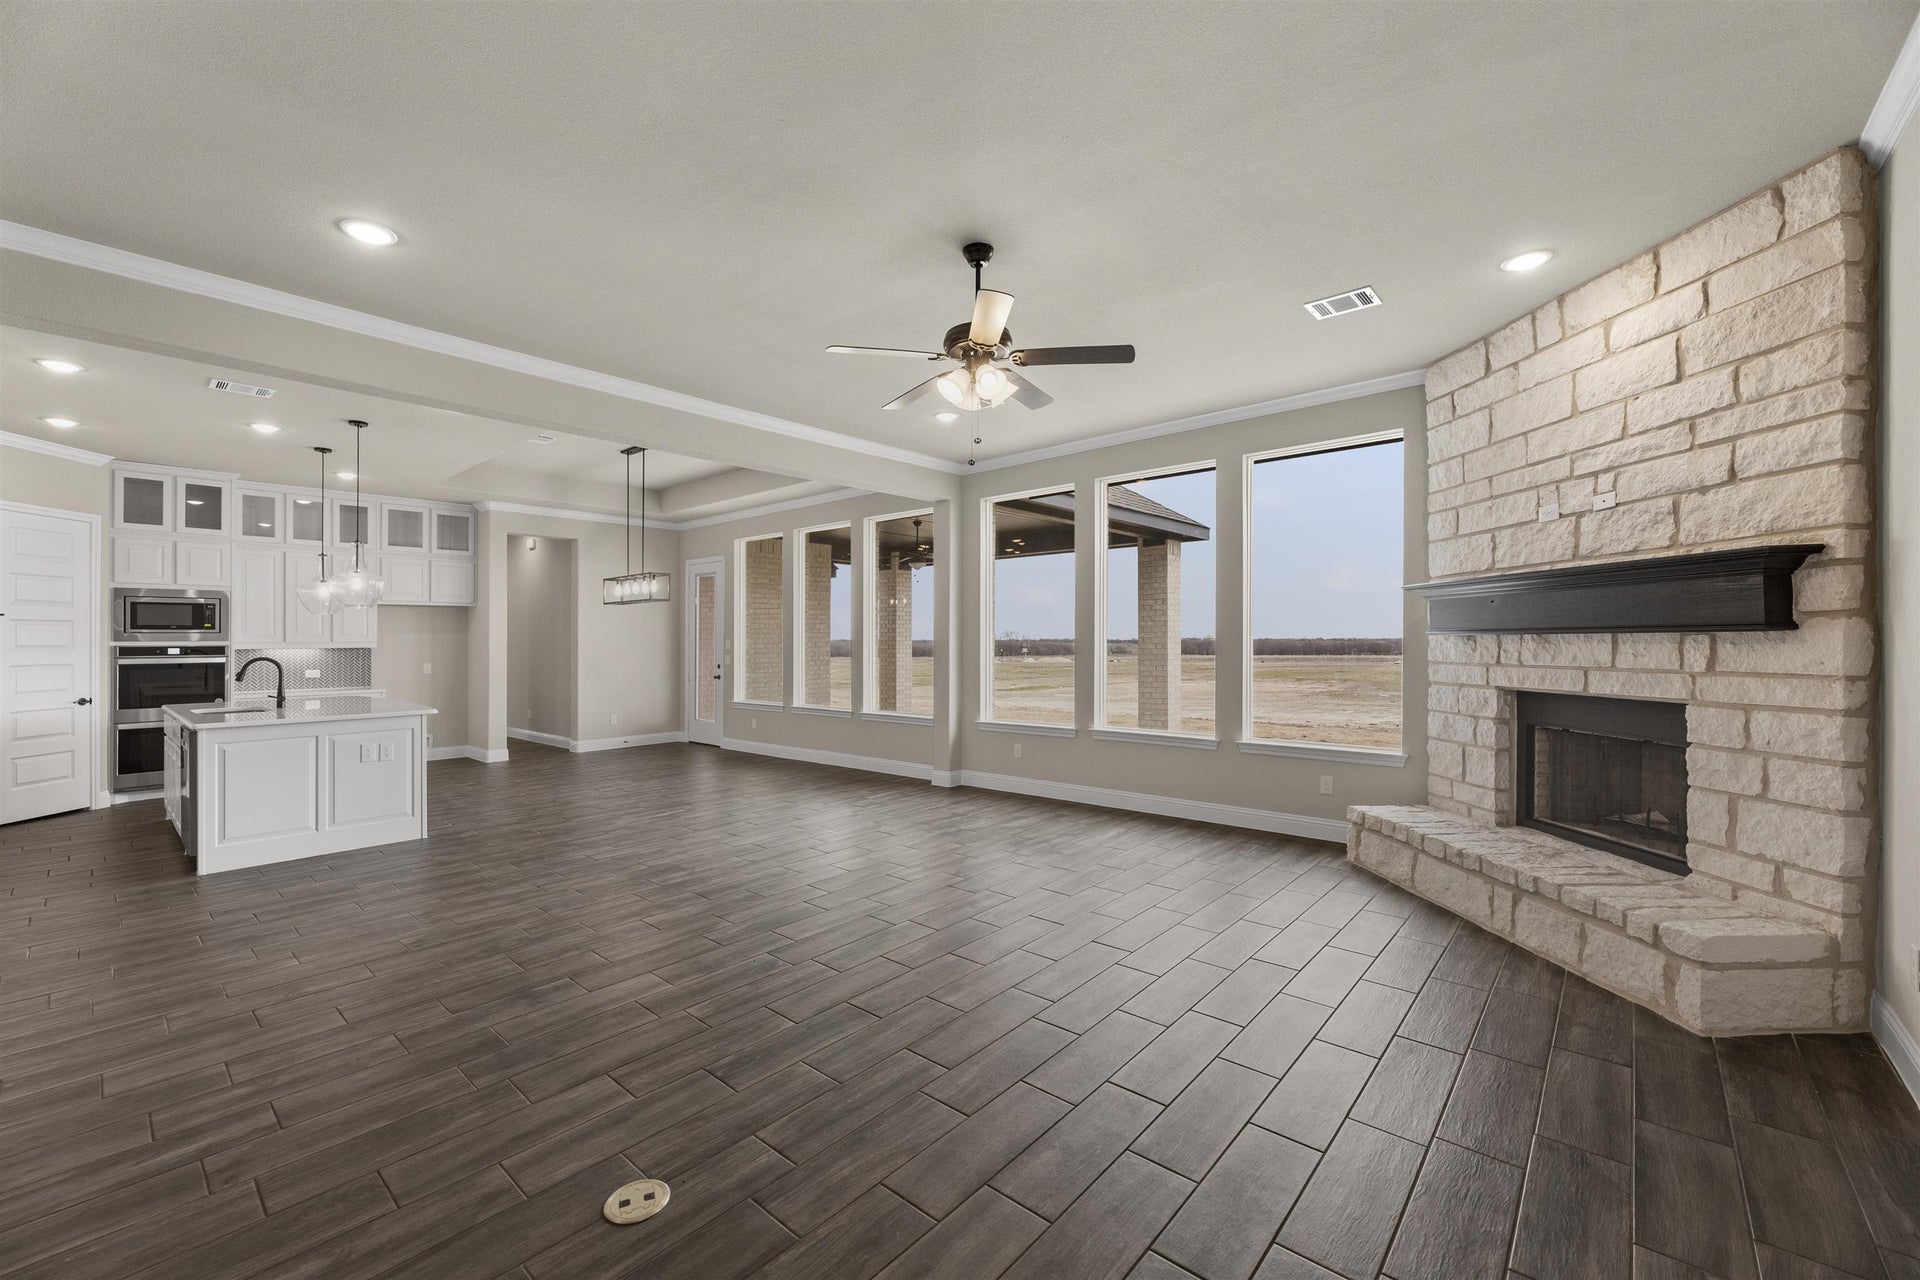 2,641sf New Home in New Fairview, TX